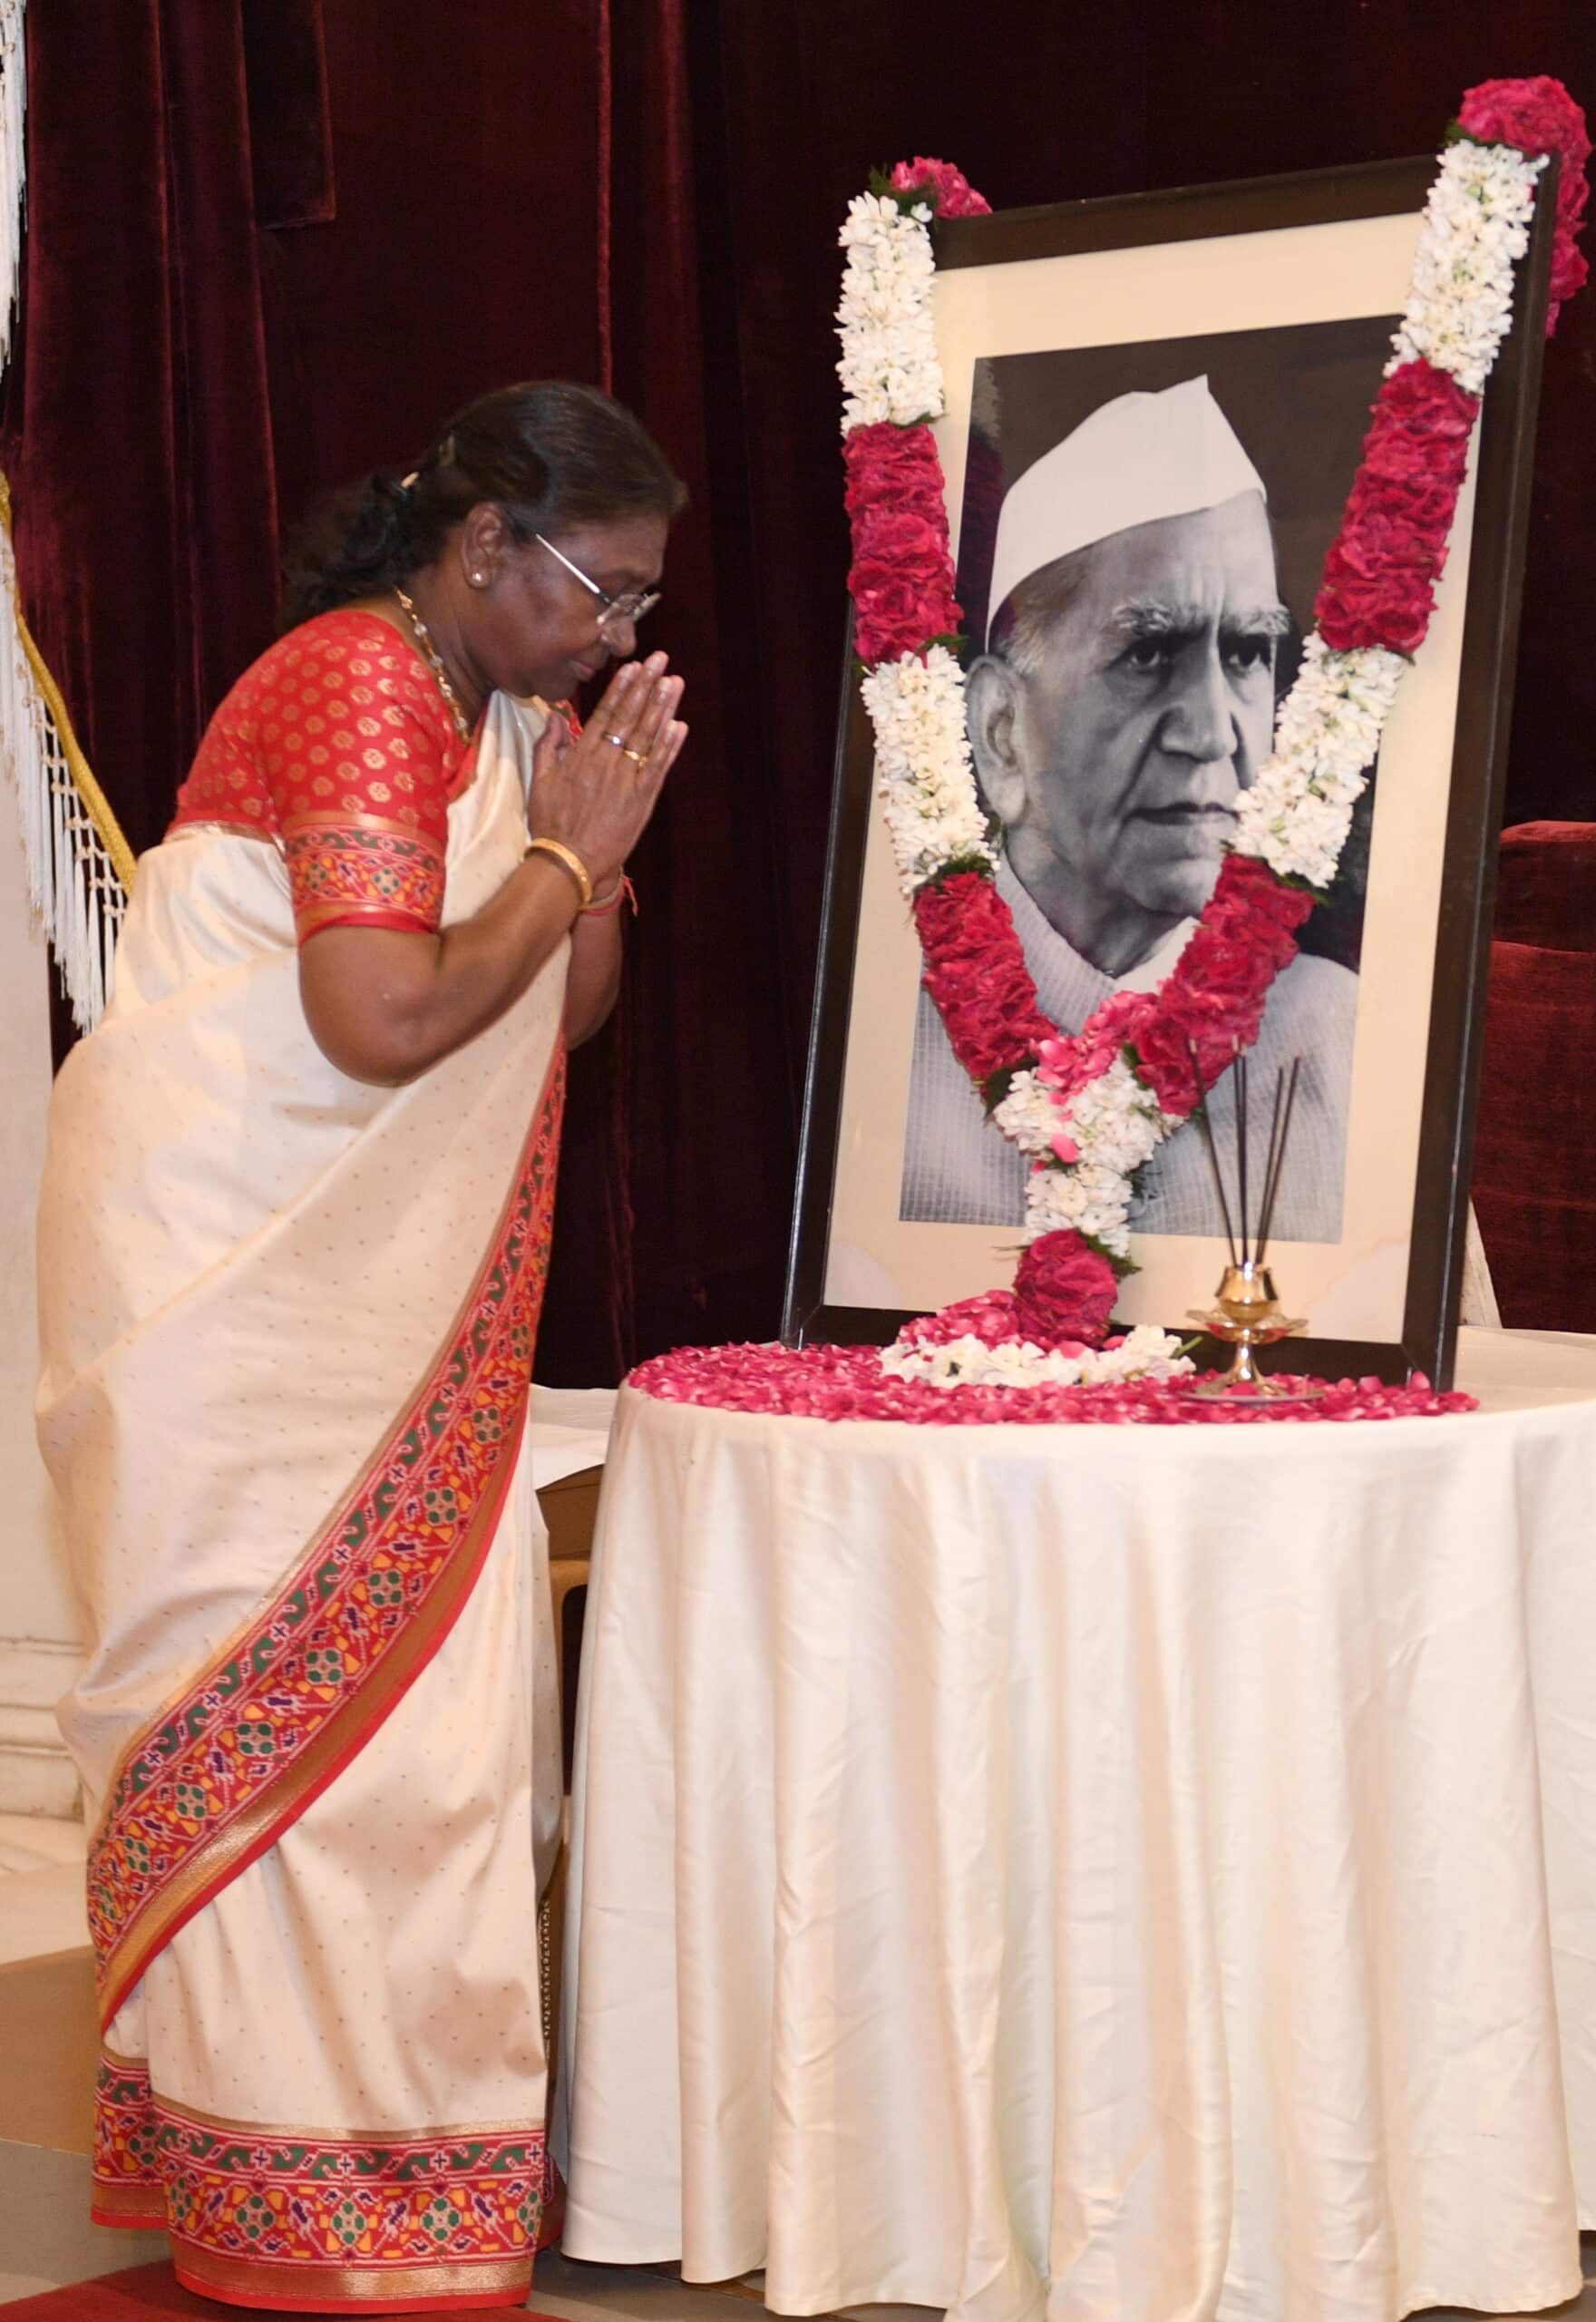 President Of India Pays Floral Tributes To Fakhruddin Ali Ahmed On His Birth Anniversary